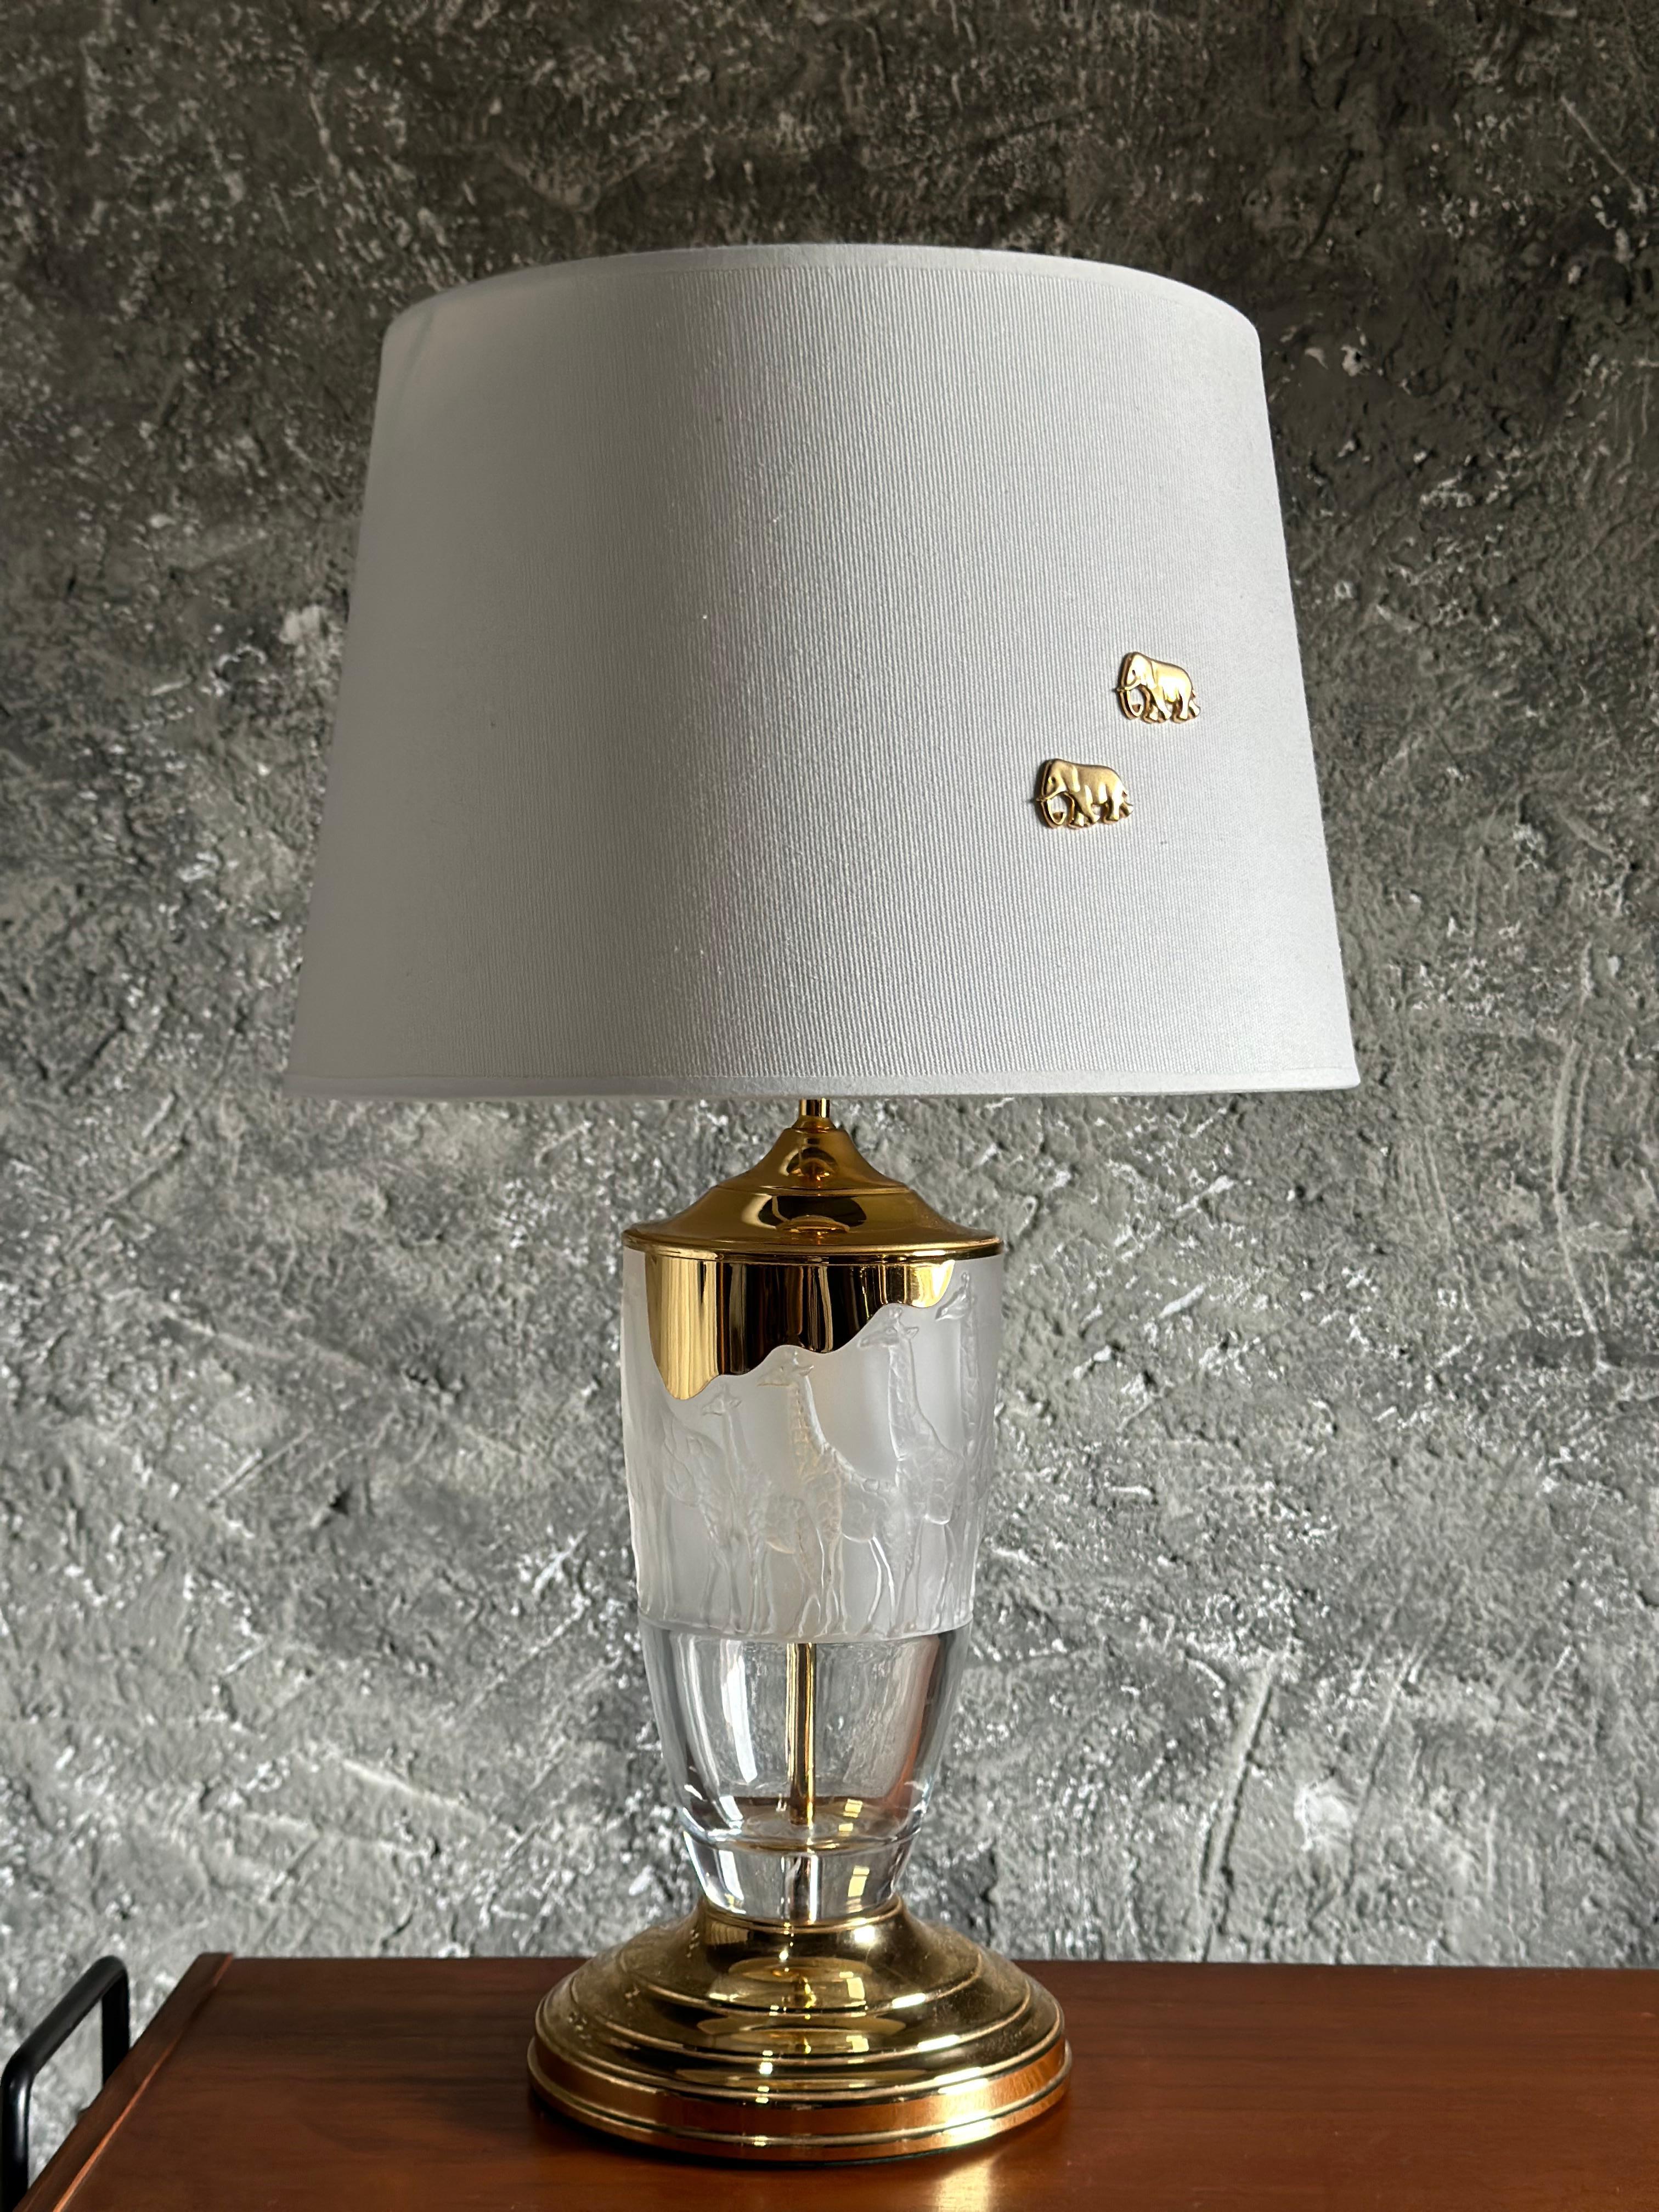 Mid-20th Century Murano Table Lamp, Africa Animal, Brass and Glass. Italy 1960s For Sale